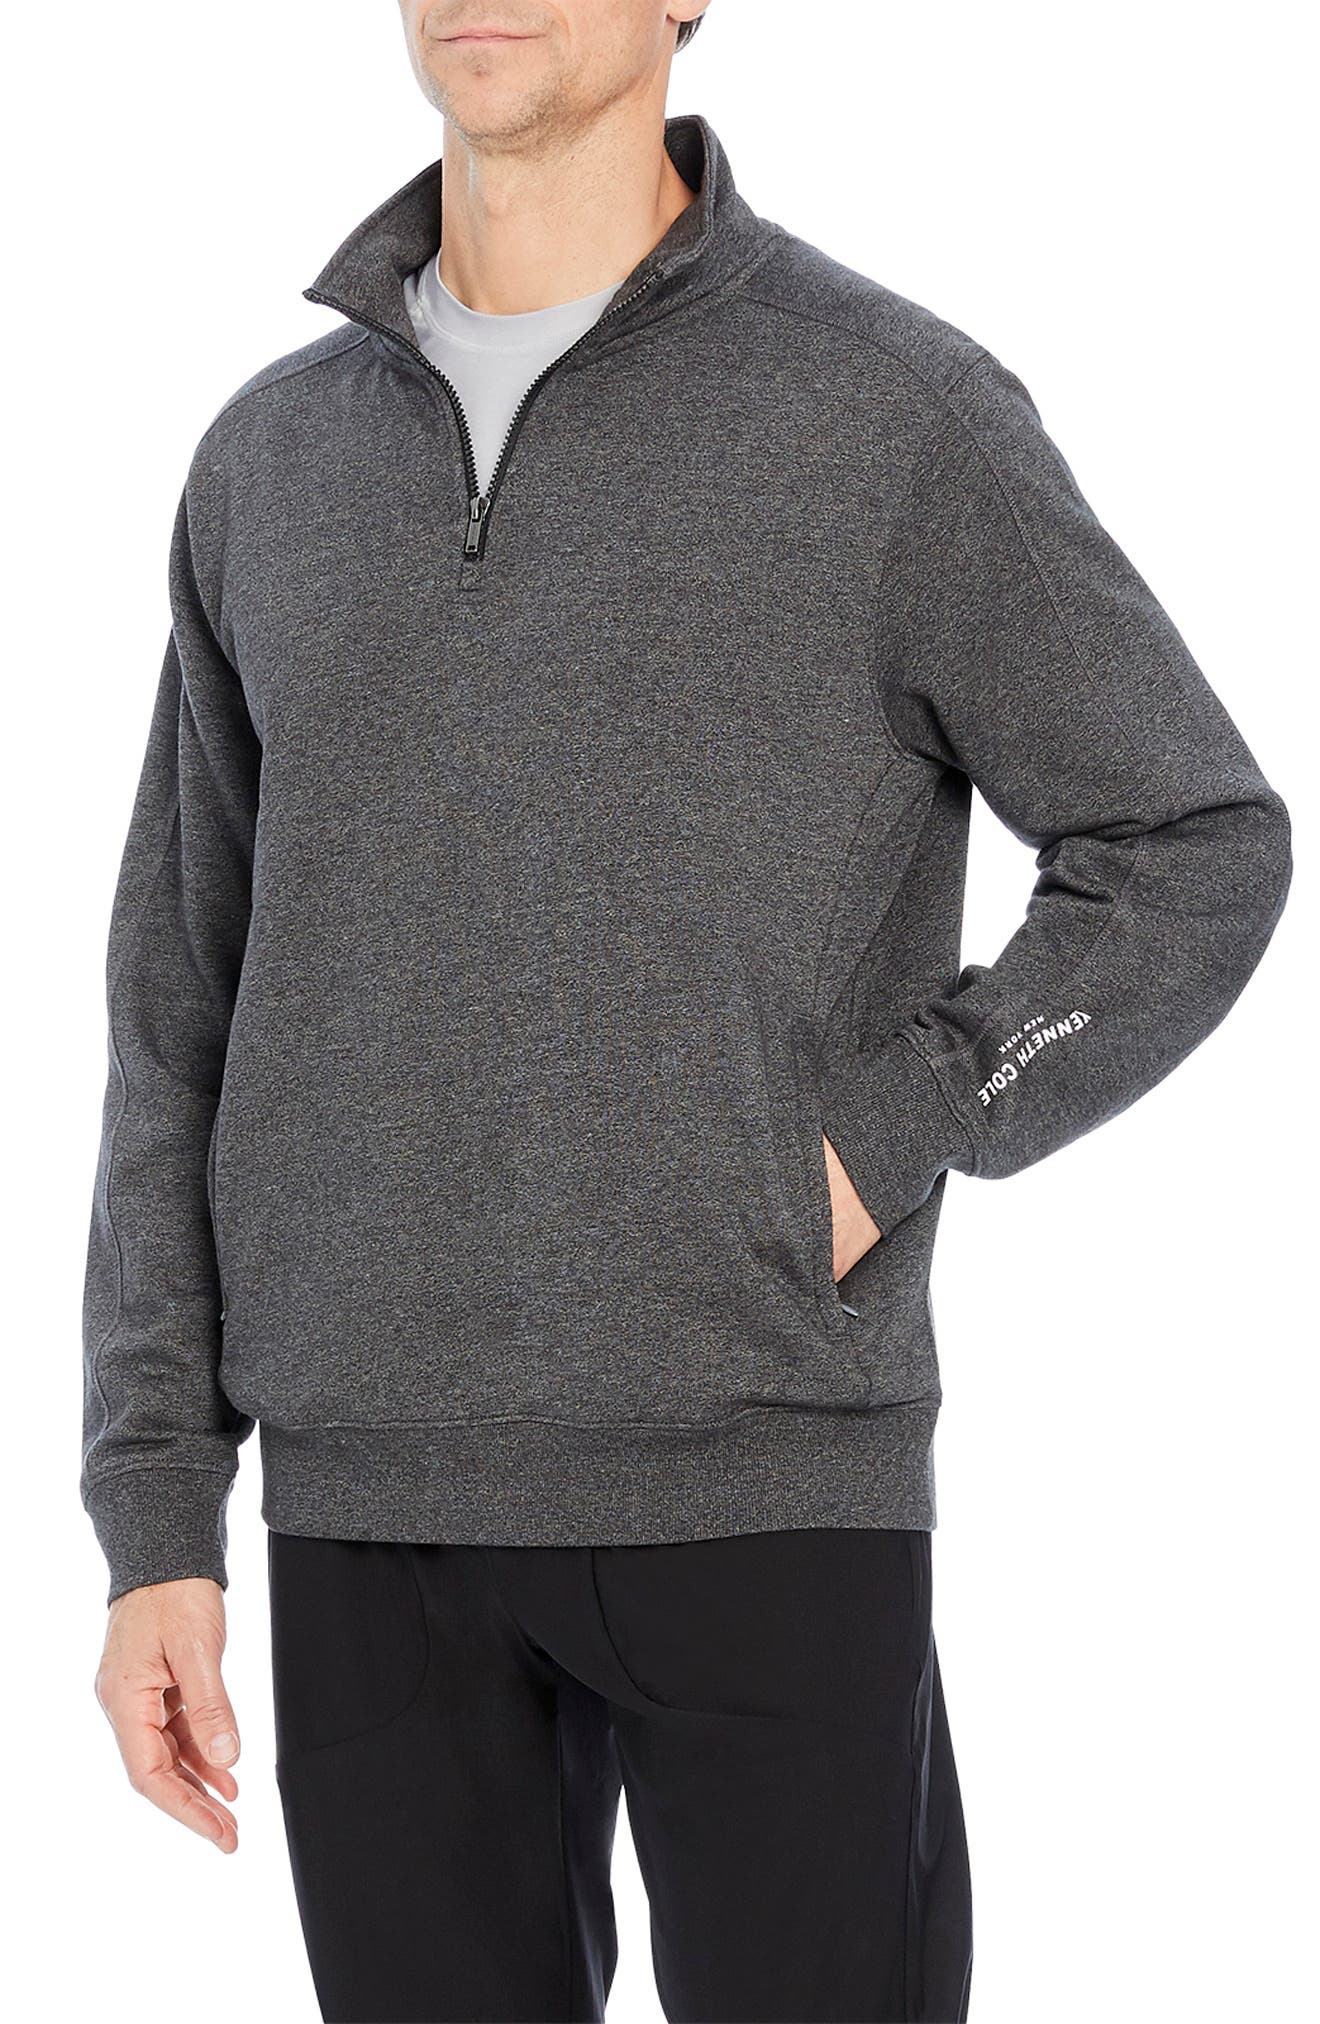 WAS $178 NWT BLACK HOODED LONG SLEEVE SWEATER KENNETH COLE BLACK LABEL 60% OFF! 